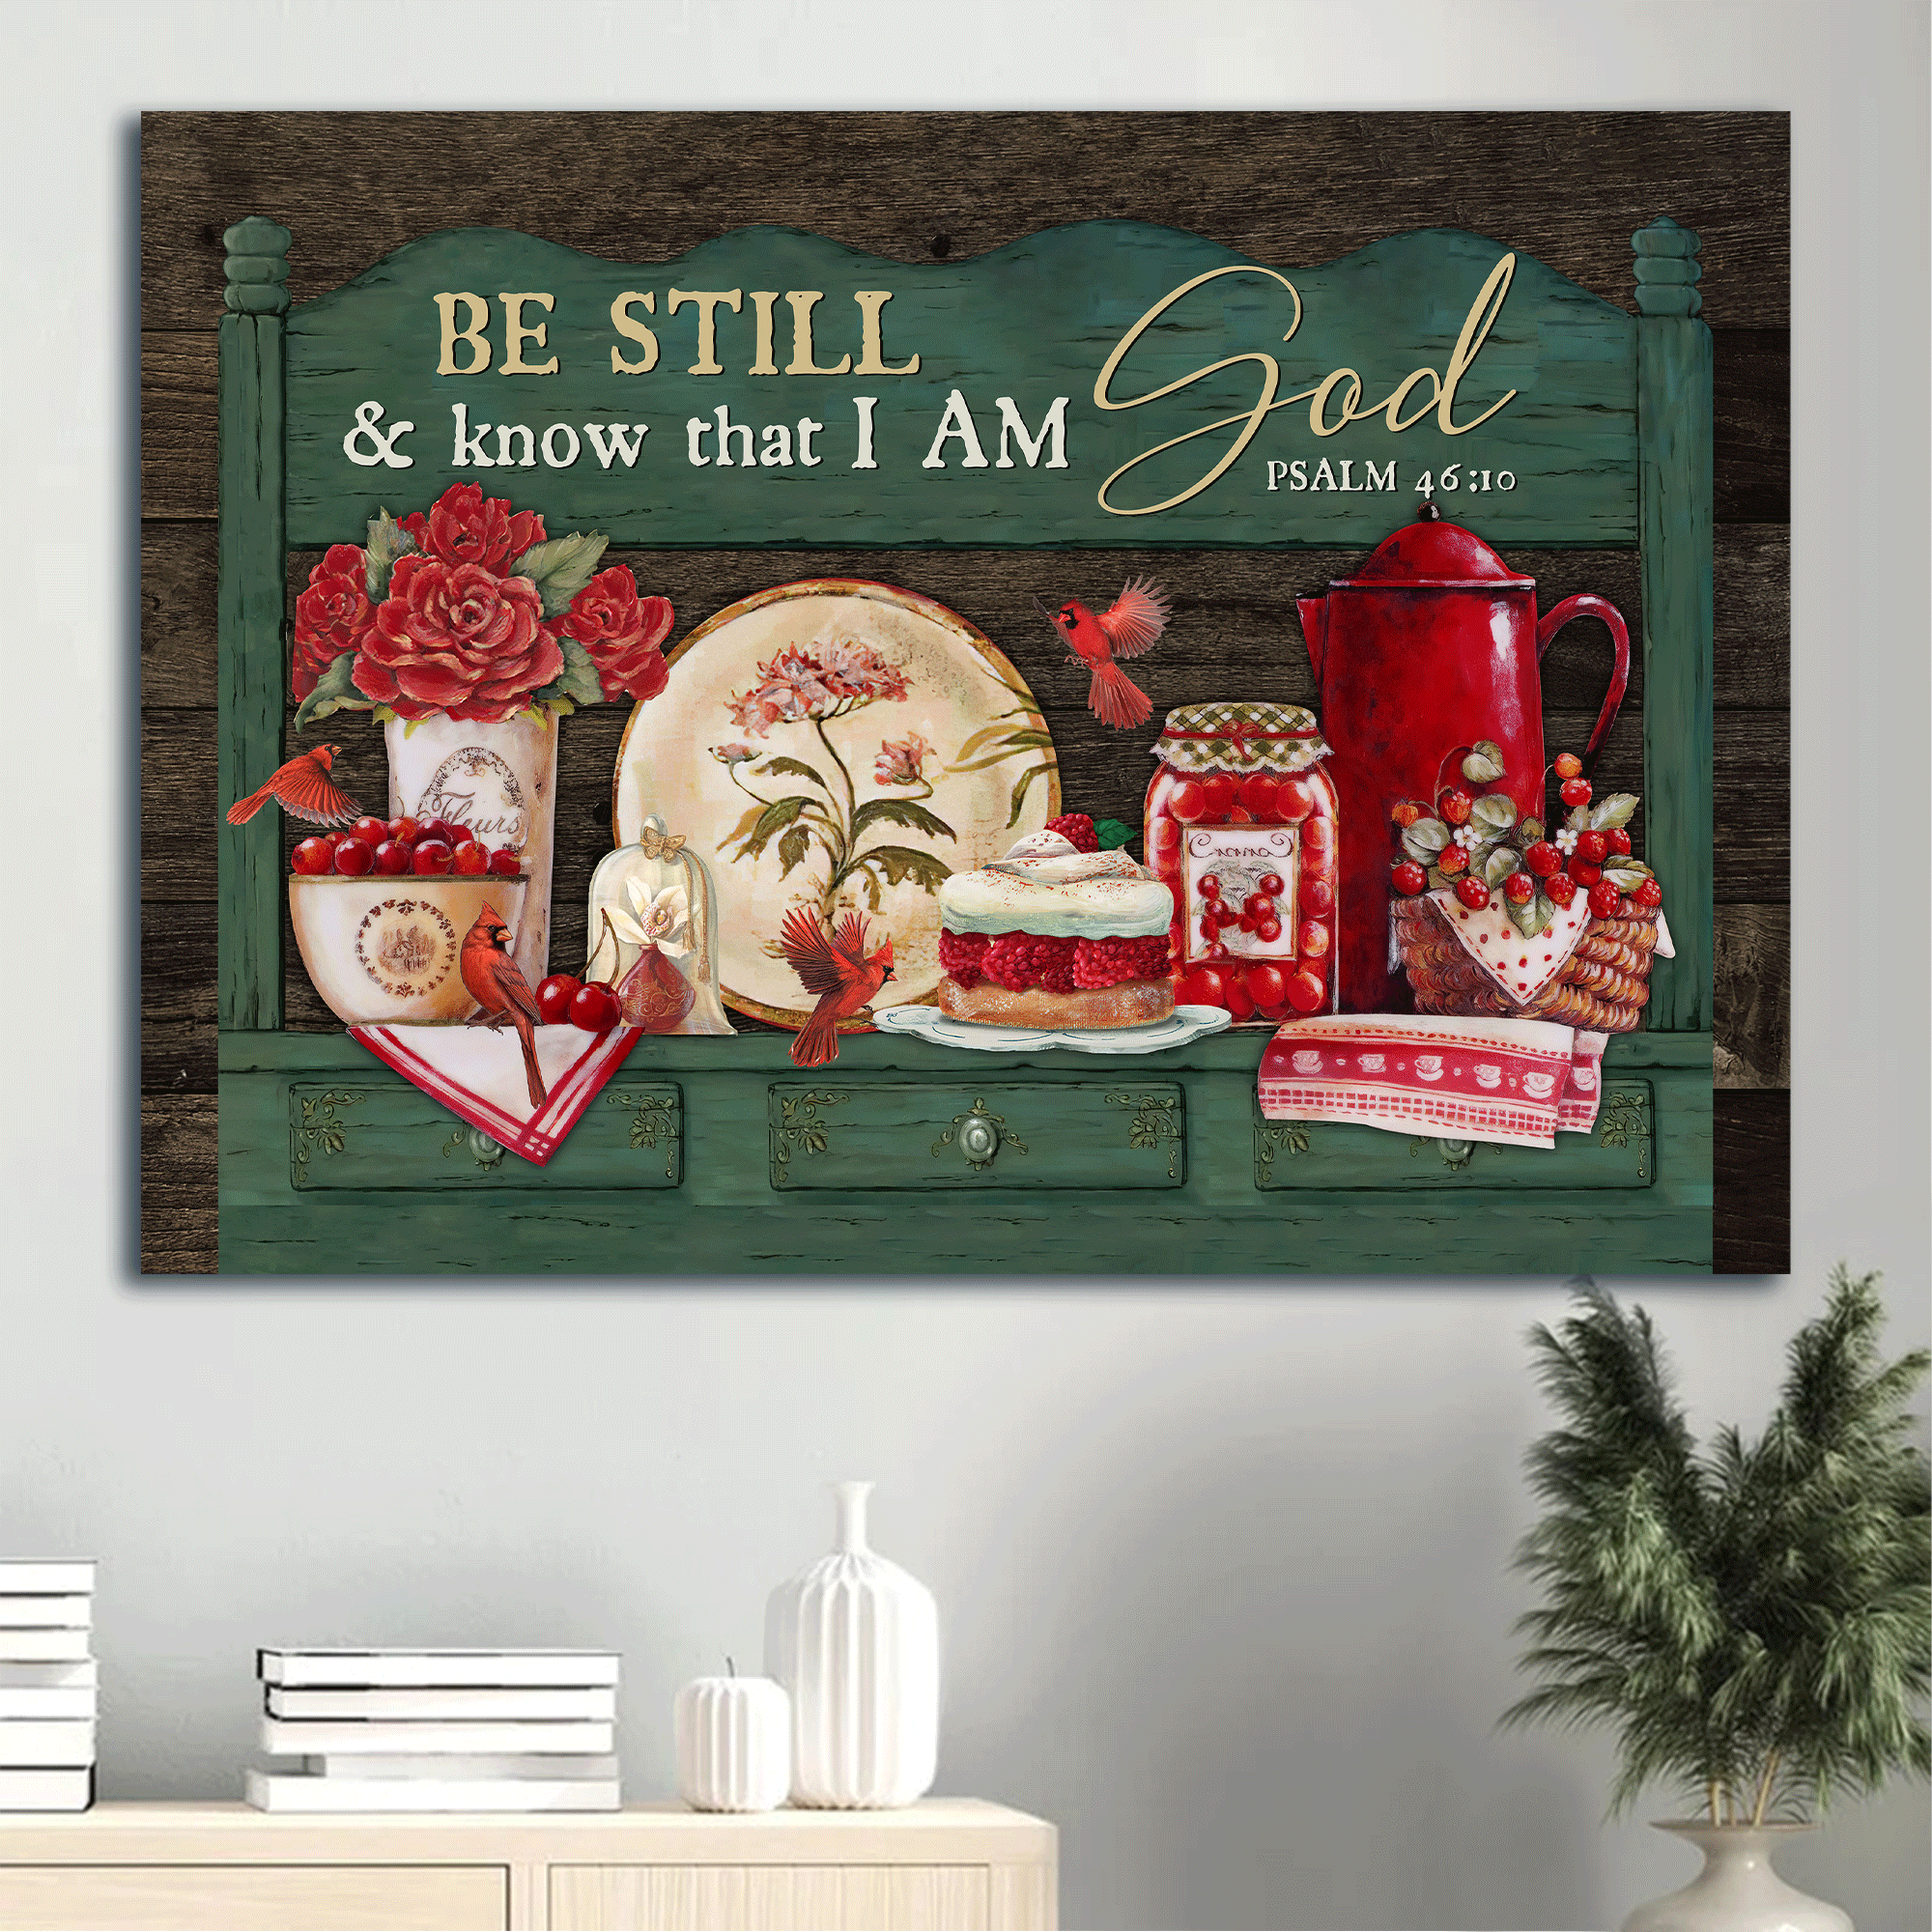 Jesus Landscape Canvas- Beautiful kitchen, Christmas Eve, Red cardinal canvas- Gift for Christian- Be still and know that I am God